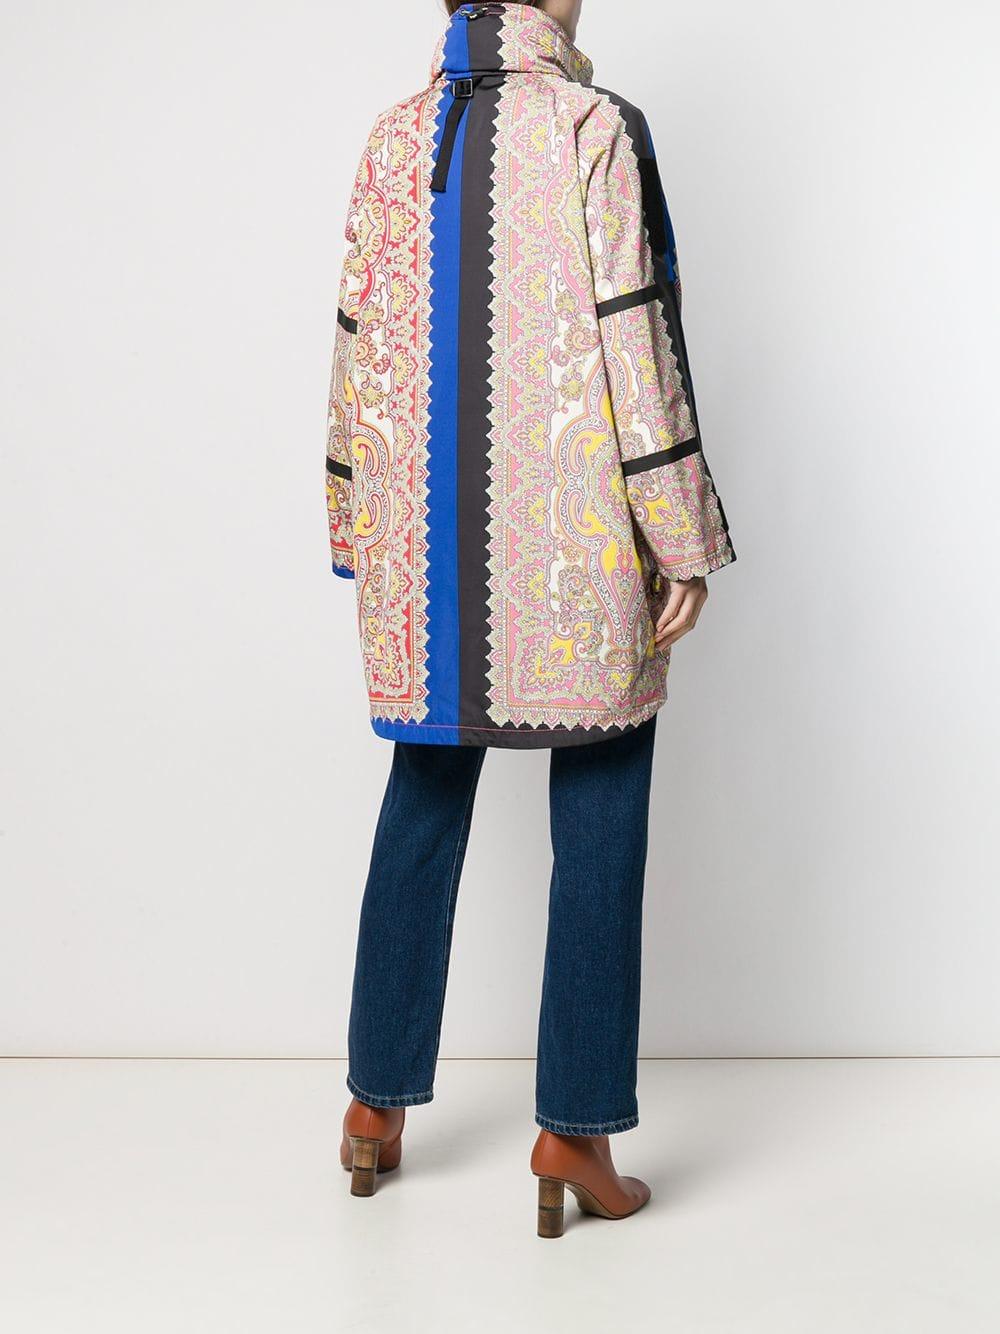 Etro Cashmere Paisley Print Coat in Blue - Lyst